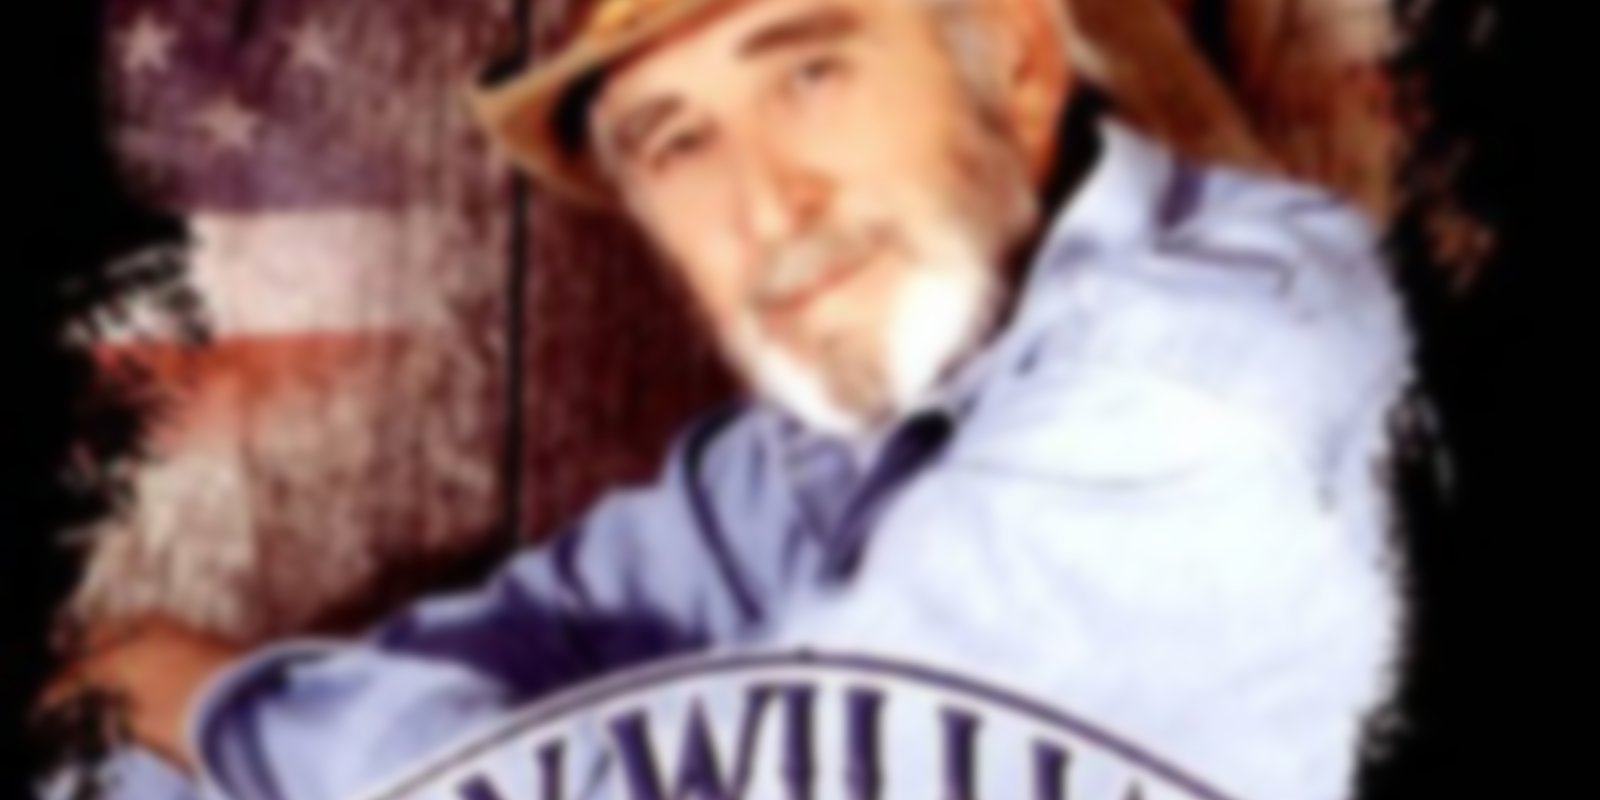 Legends of Country-Pop - Don Williams